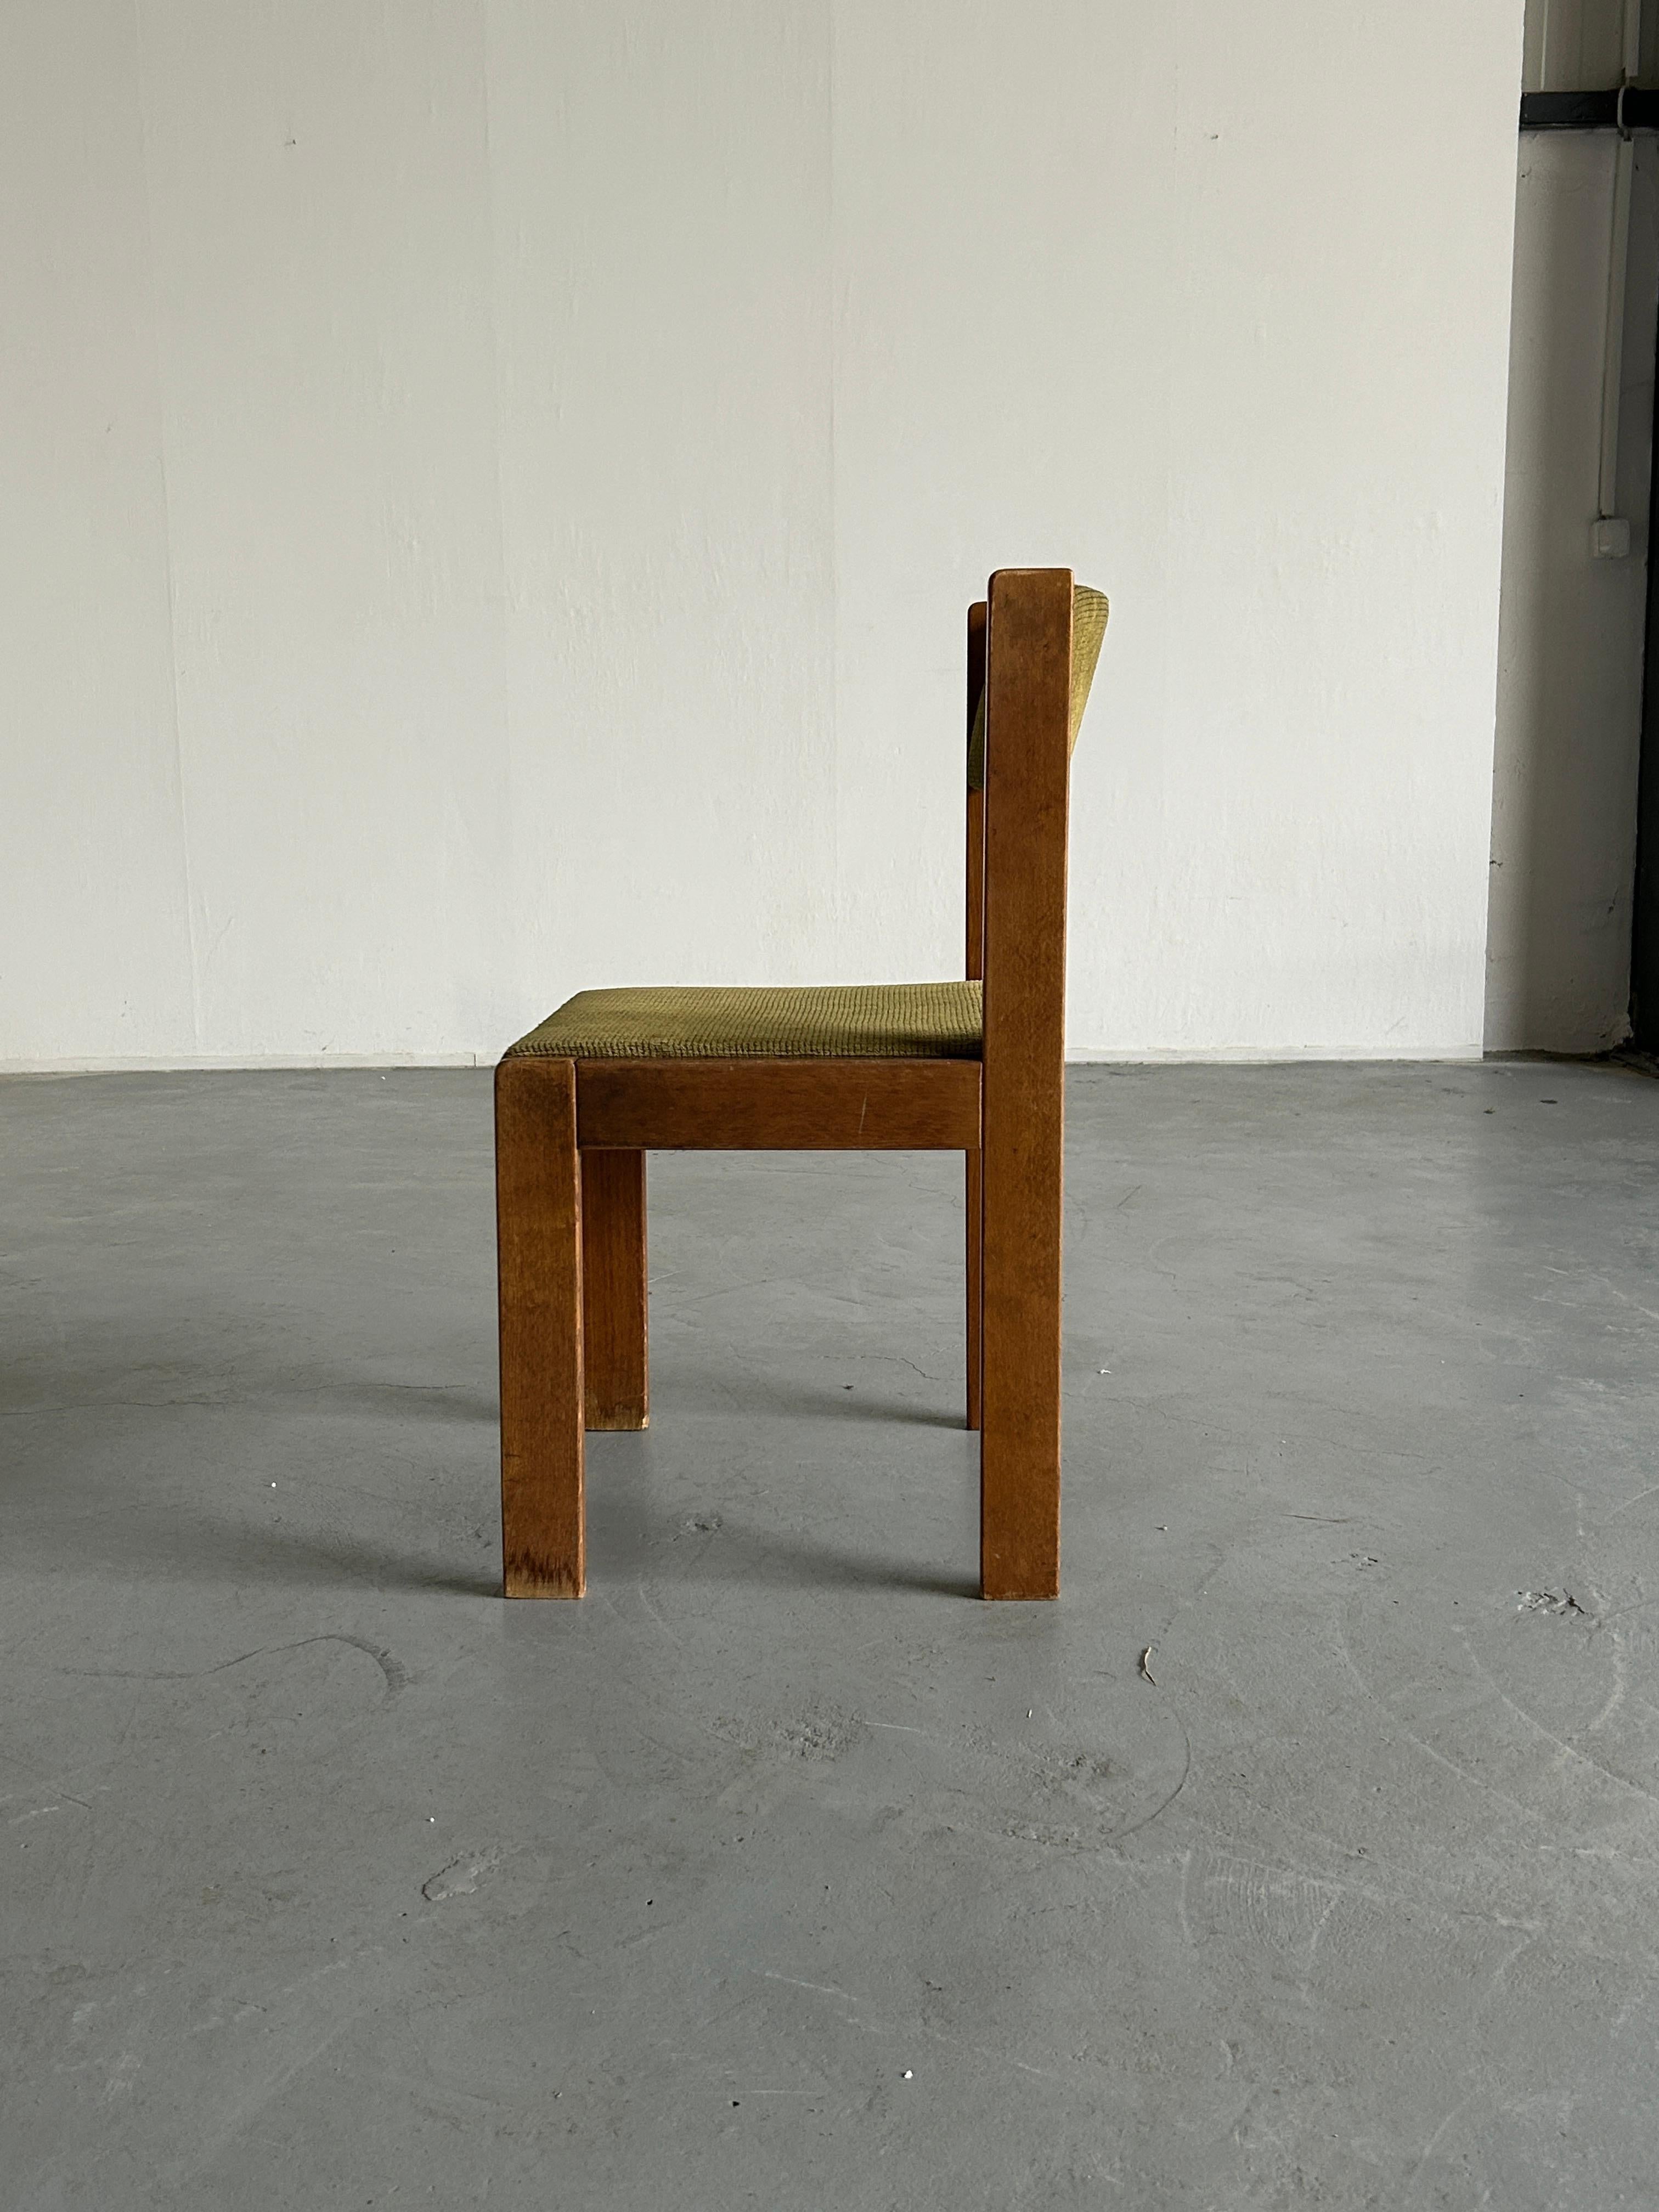 Upholstery Mid-Century Modern Constructivist Dining Chair by Wiesner Hager, 1960s Austria